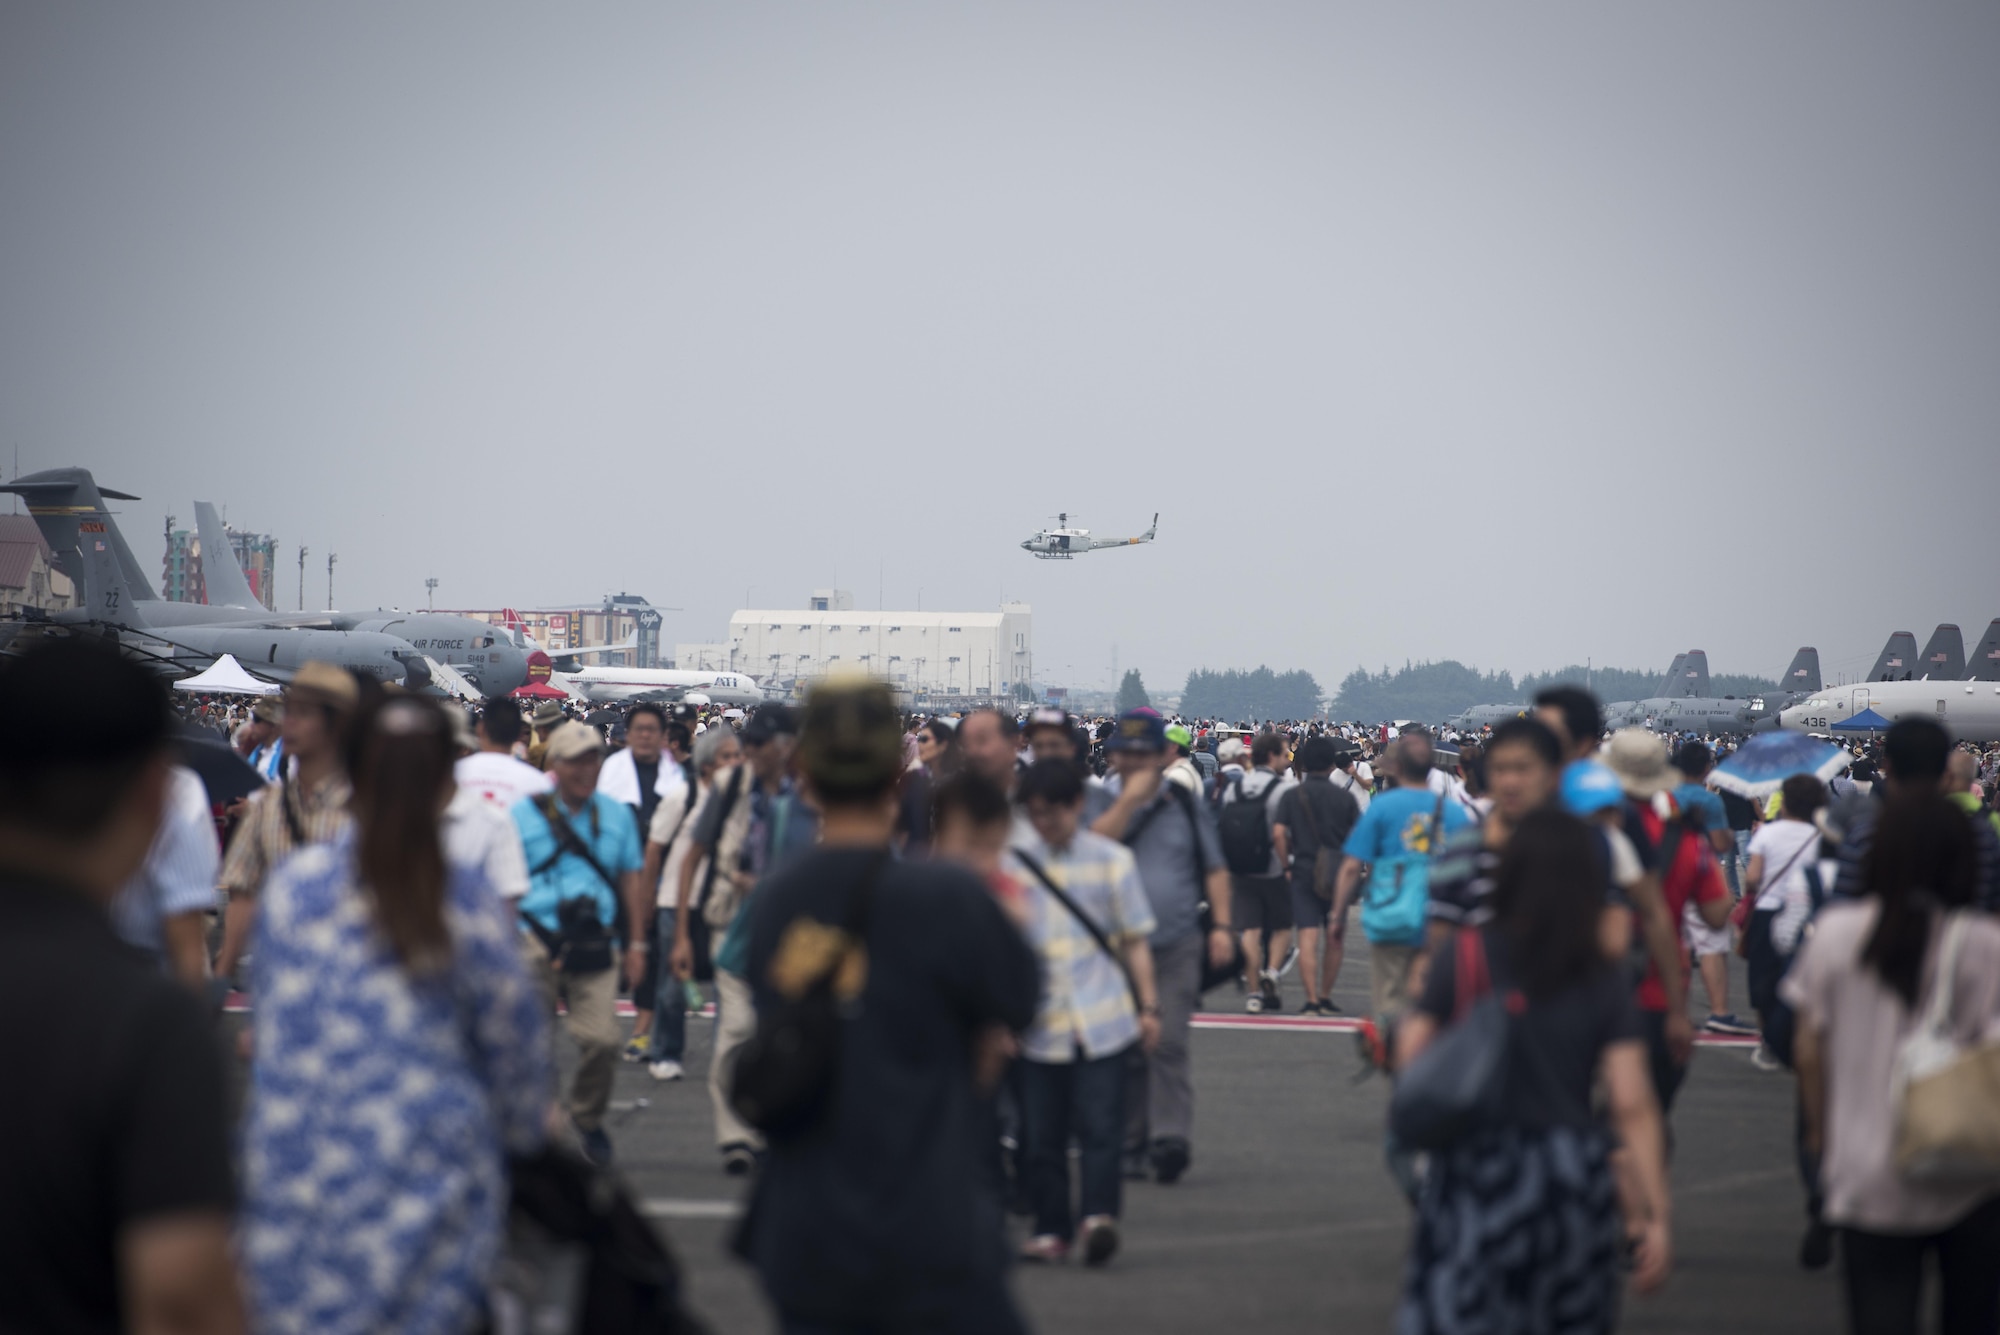 A UH-1N Iroquois hovers near the flightline during the 2016 Japanese-American Friendship Festival at Yokota Air Base, Japan, Sept. 17, 2016. The festival is held annually and offers the US military on base a chance to share their work and culture with their off-base neighbors. More than 185,000 people attended in 2015. (U.S. Air Force photo by Staff Sgt. Cody H. Ramirez/Released)